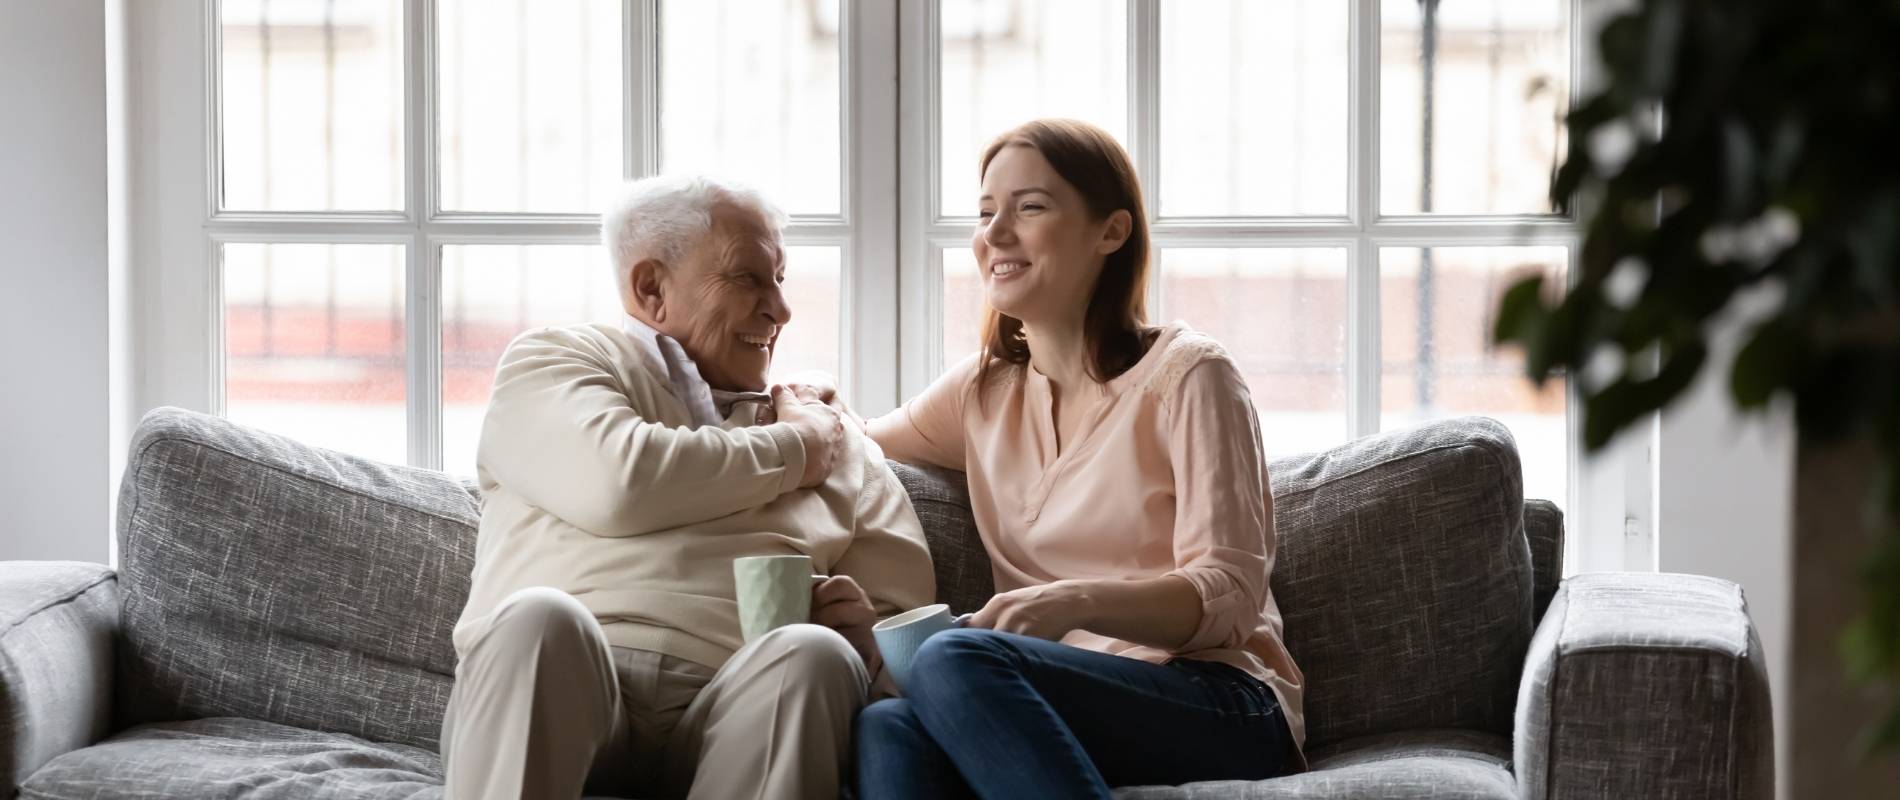 older man sitting next to younger woman on couch